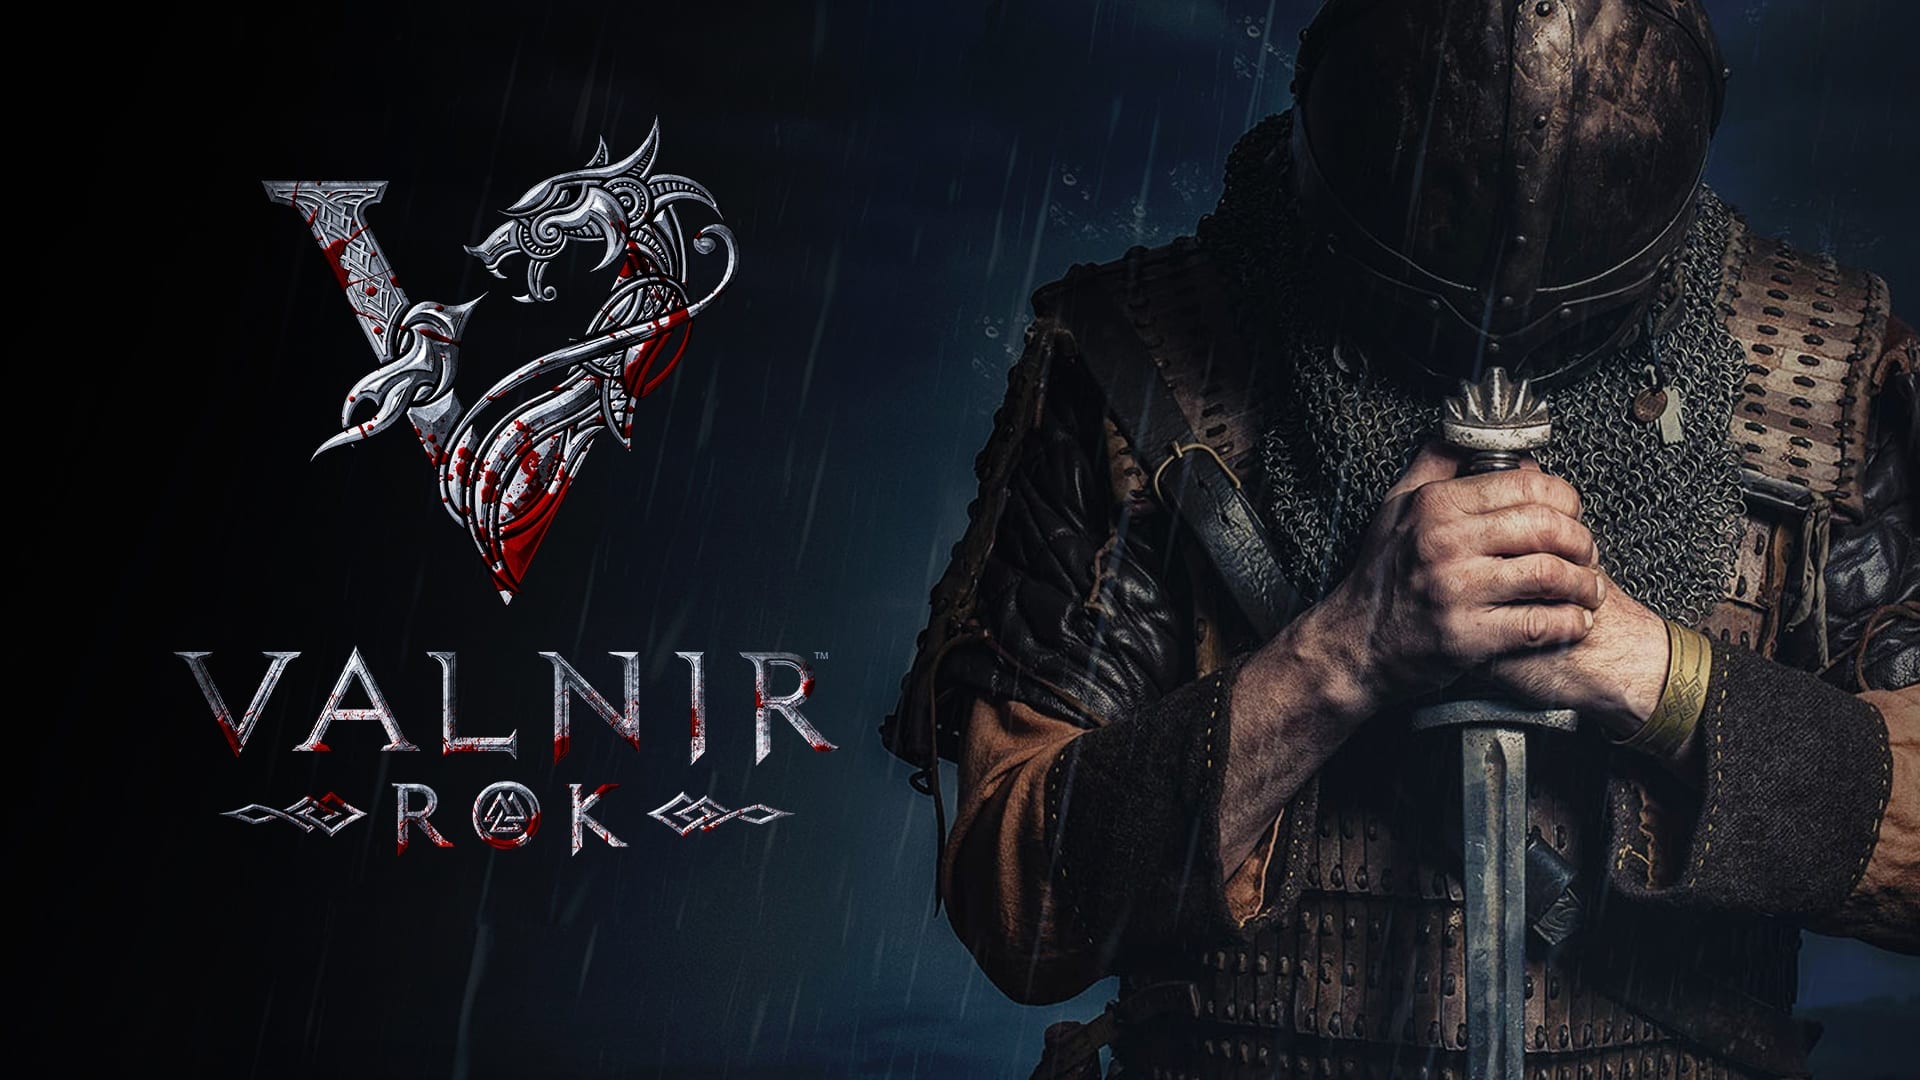 Big Changes Are Coming To Valnir Rok – Price Discount And A Huge Update